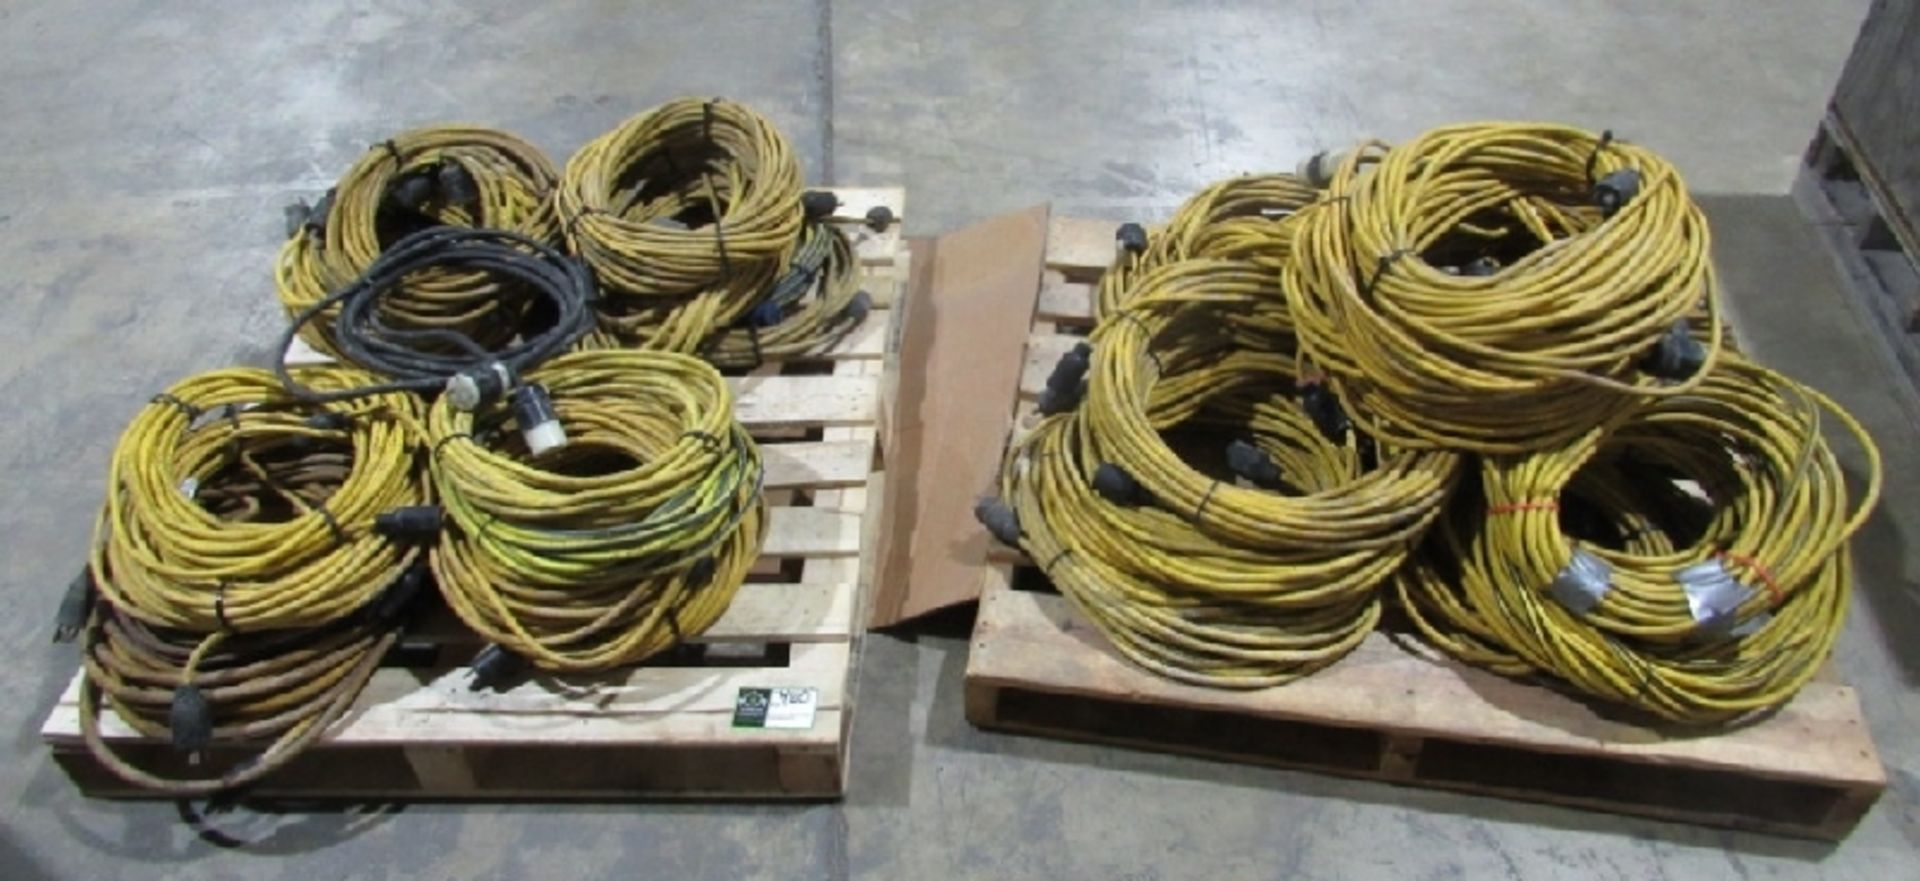 (qty - 50) Twist Lock Extension Cords- ***Located in Chattanooga, TN*** MFR - Unknown 10' to 20'